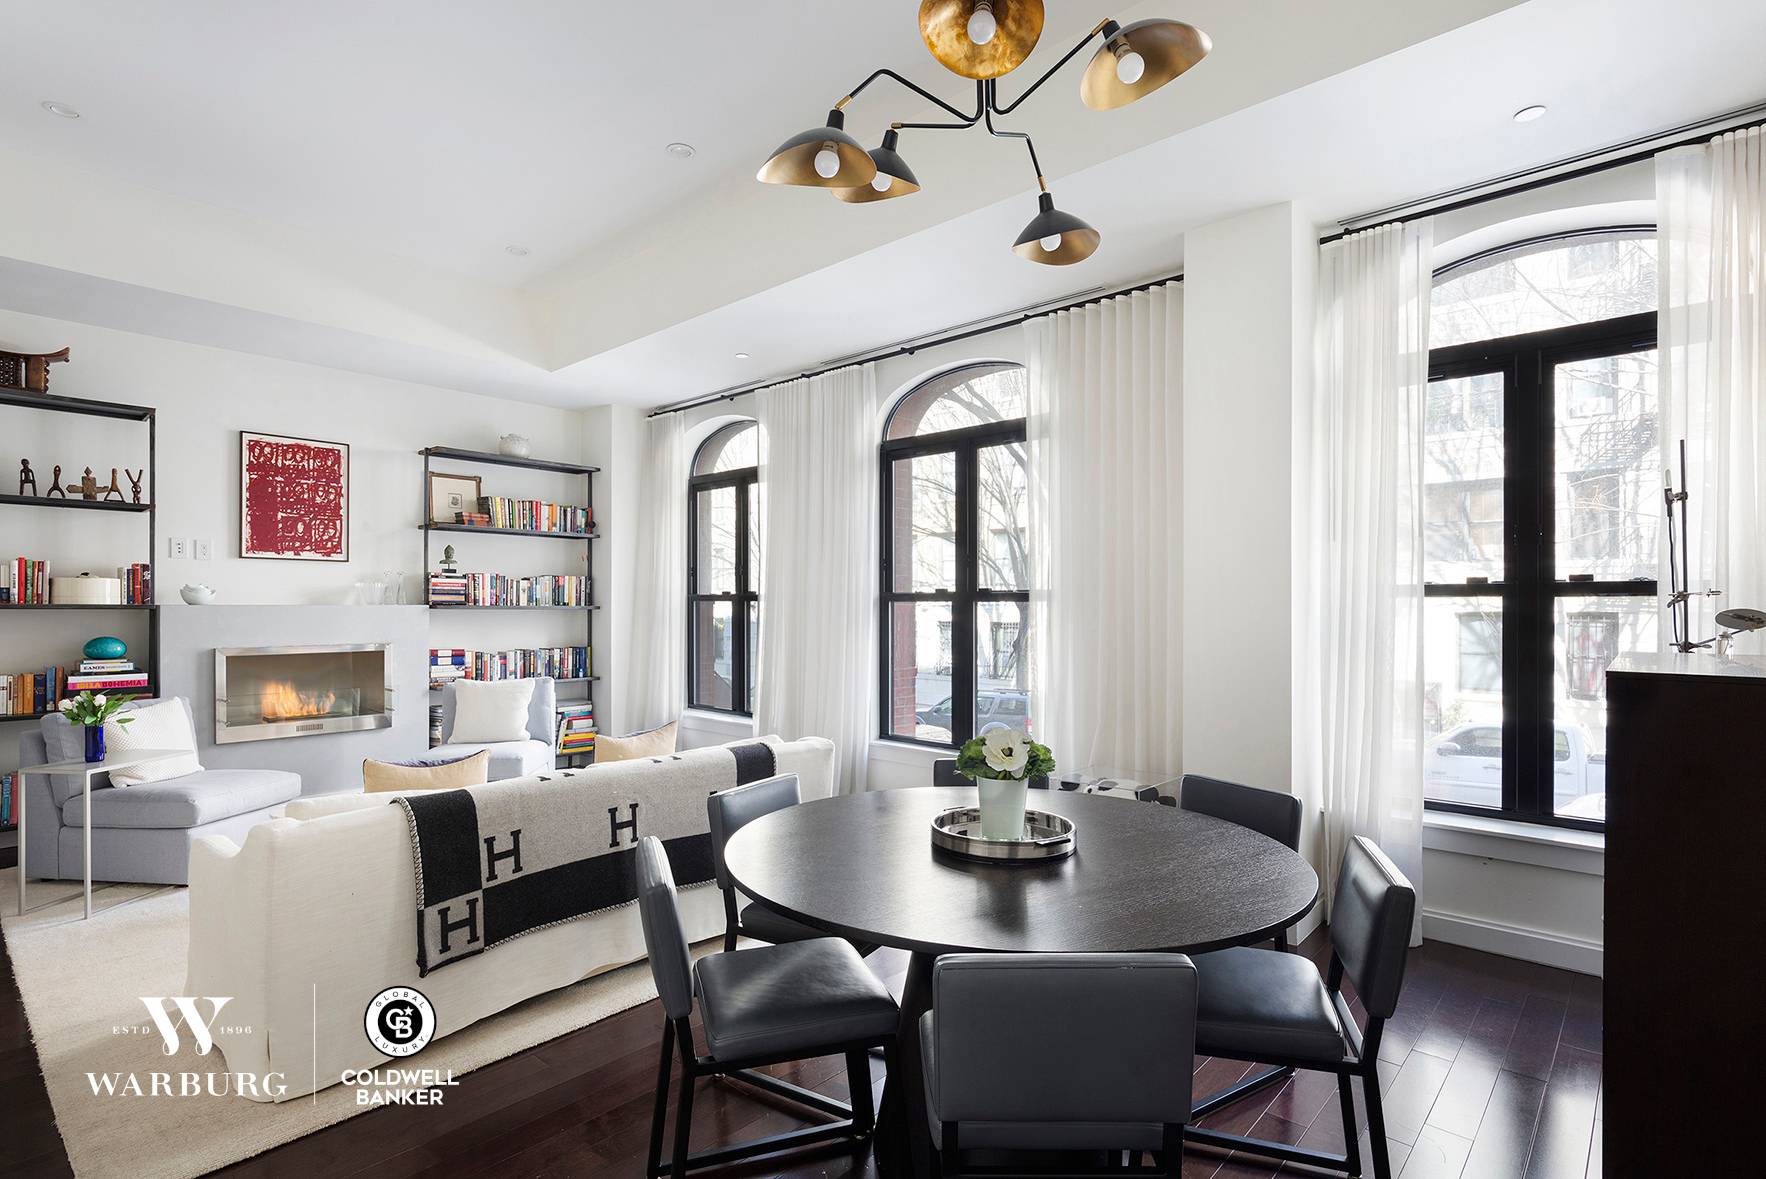 Welcome to 320 West 115th street, where a private elevator opens up to a full floor, four bedroom home that spans nearly 2, 000 square feet.